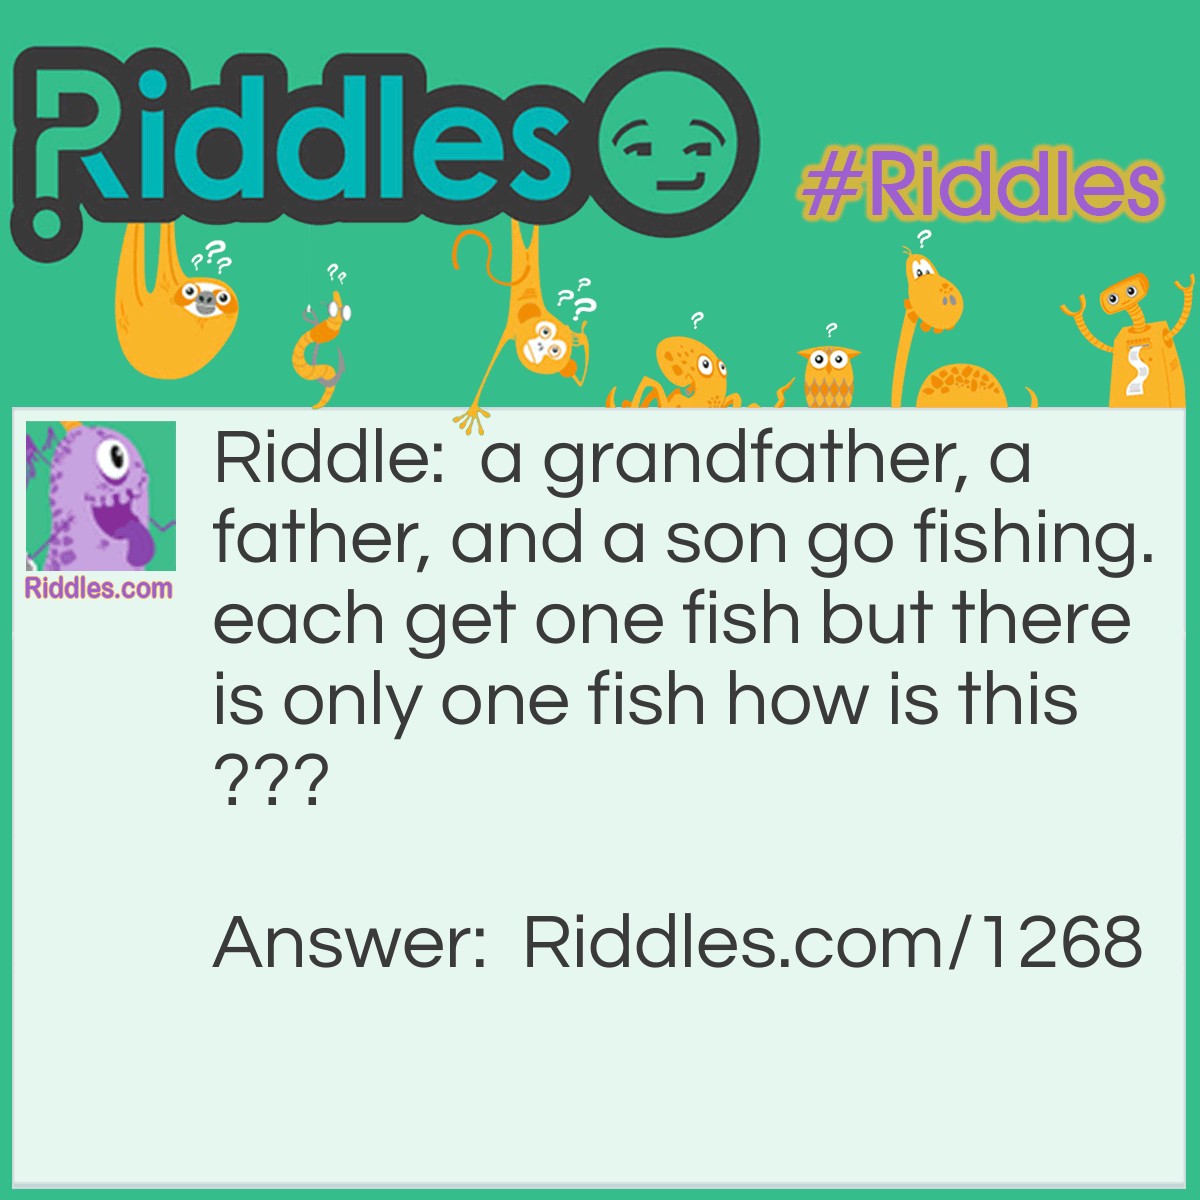 Riddle: A grandfather, a father, and a son go fishing. Each gets one fish but there is only one fish how is this? Answer: It is only one person. He is the son of his father. He is a father to his son. He is a grandfather to his grandchild.